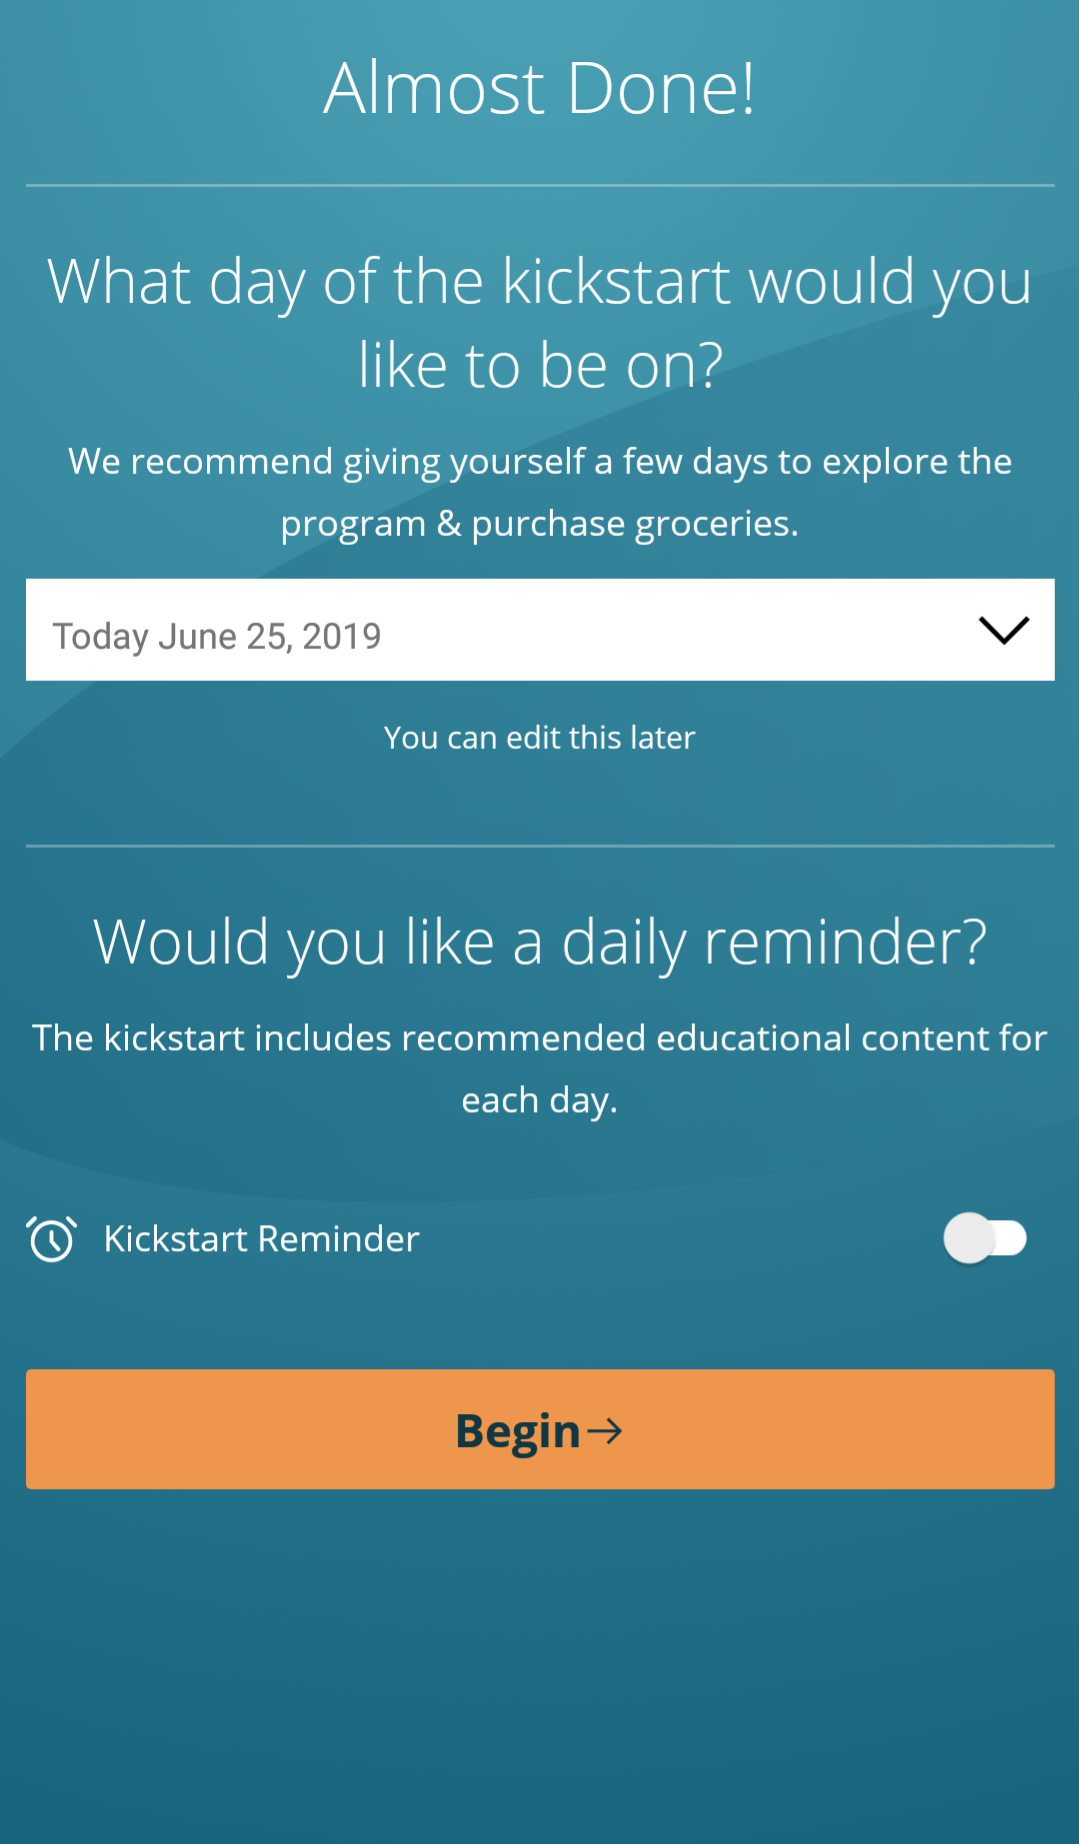 21 Day Vegan Kickstart has recipes and diet plans to convert to a vegan plant-based diet